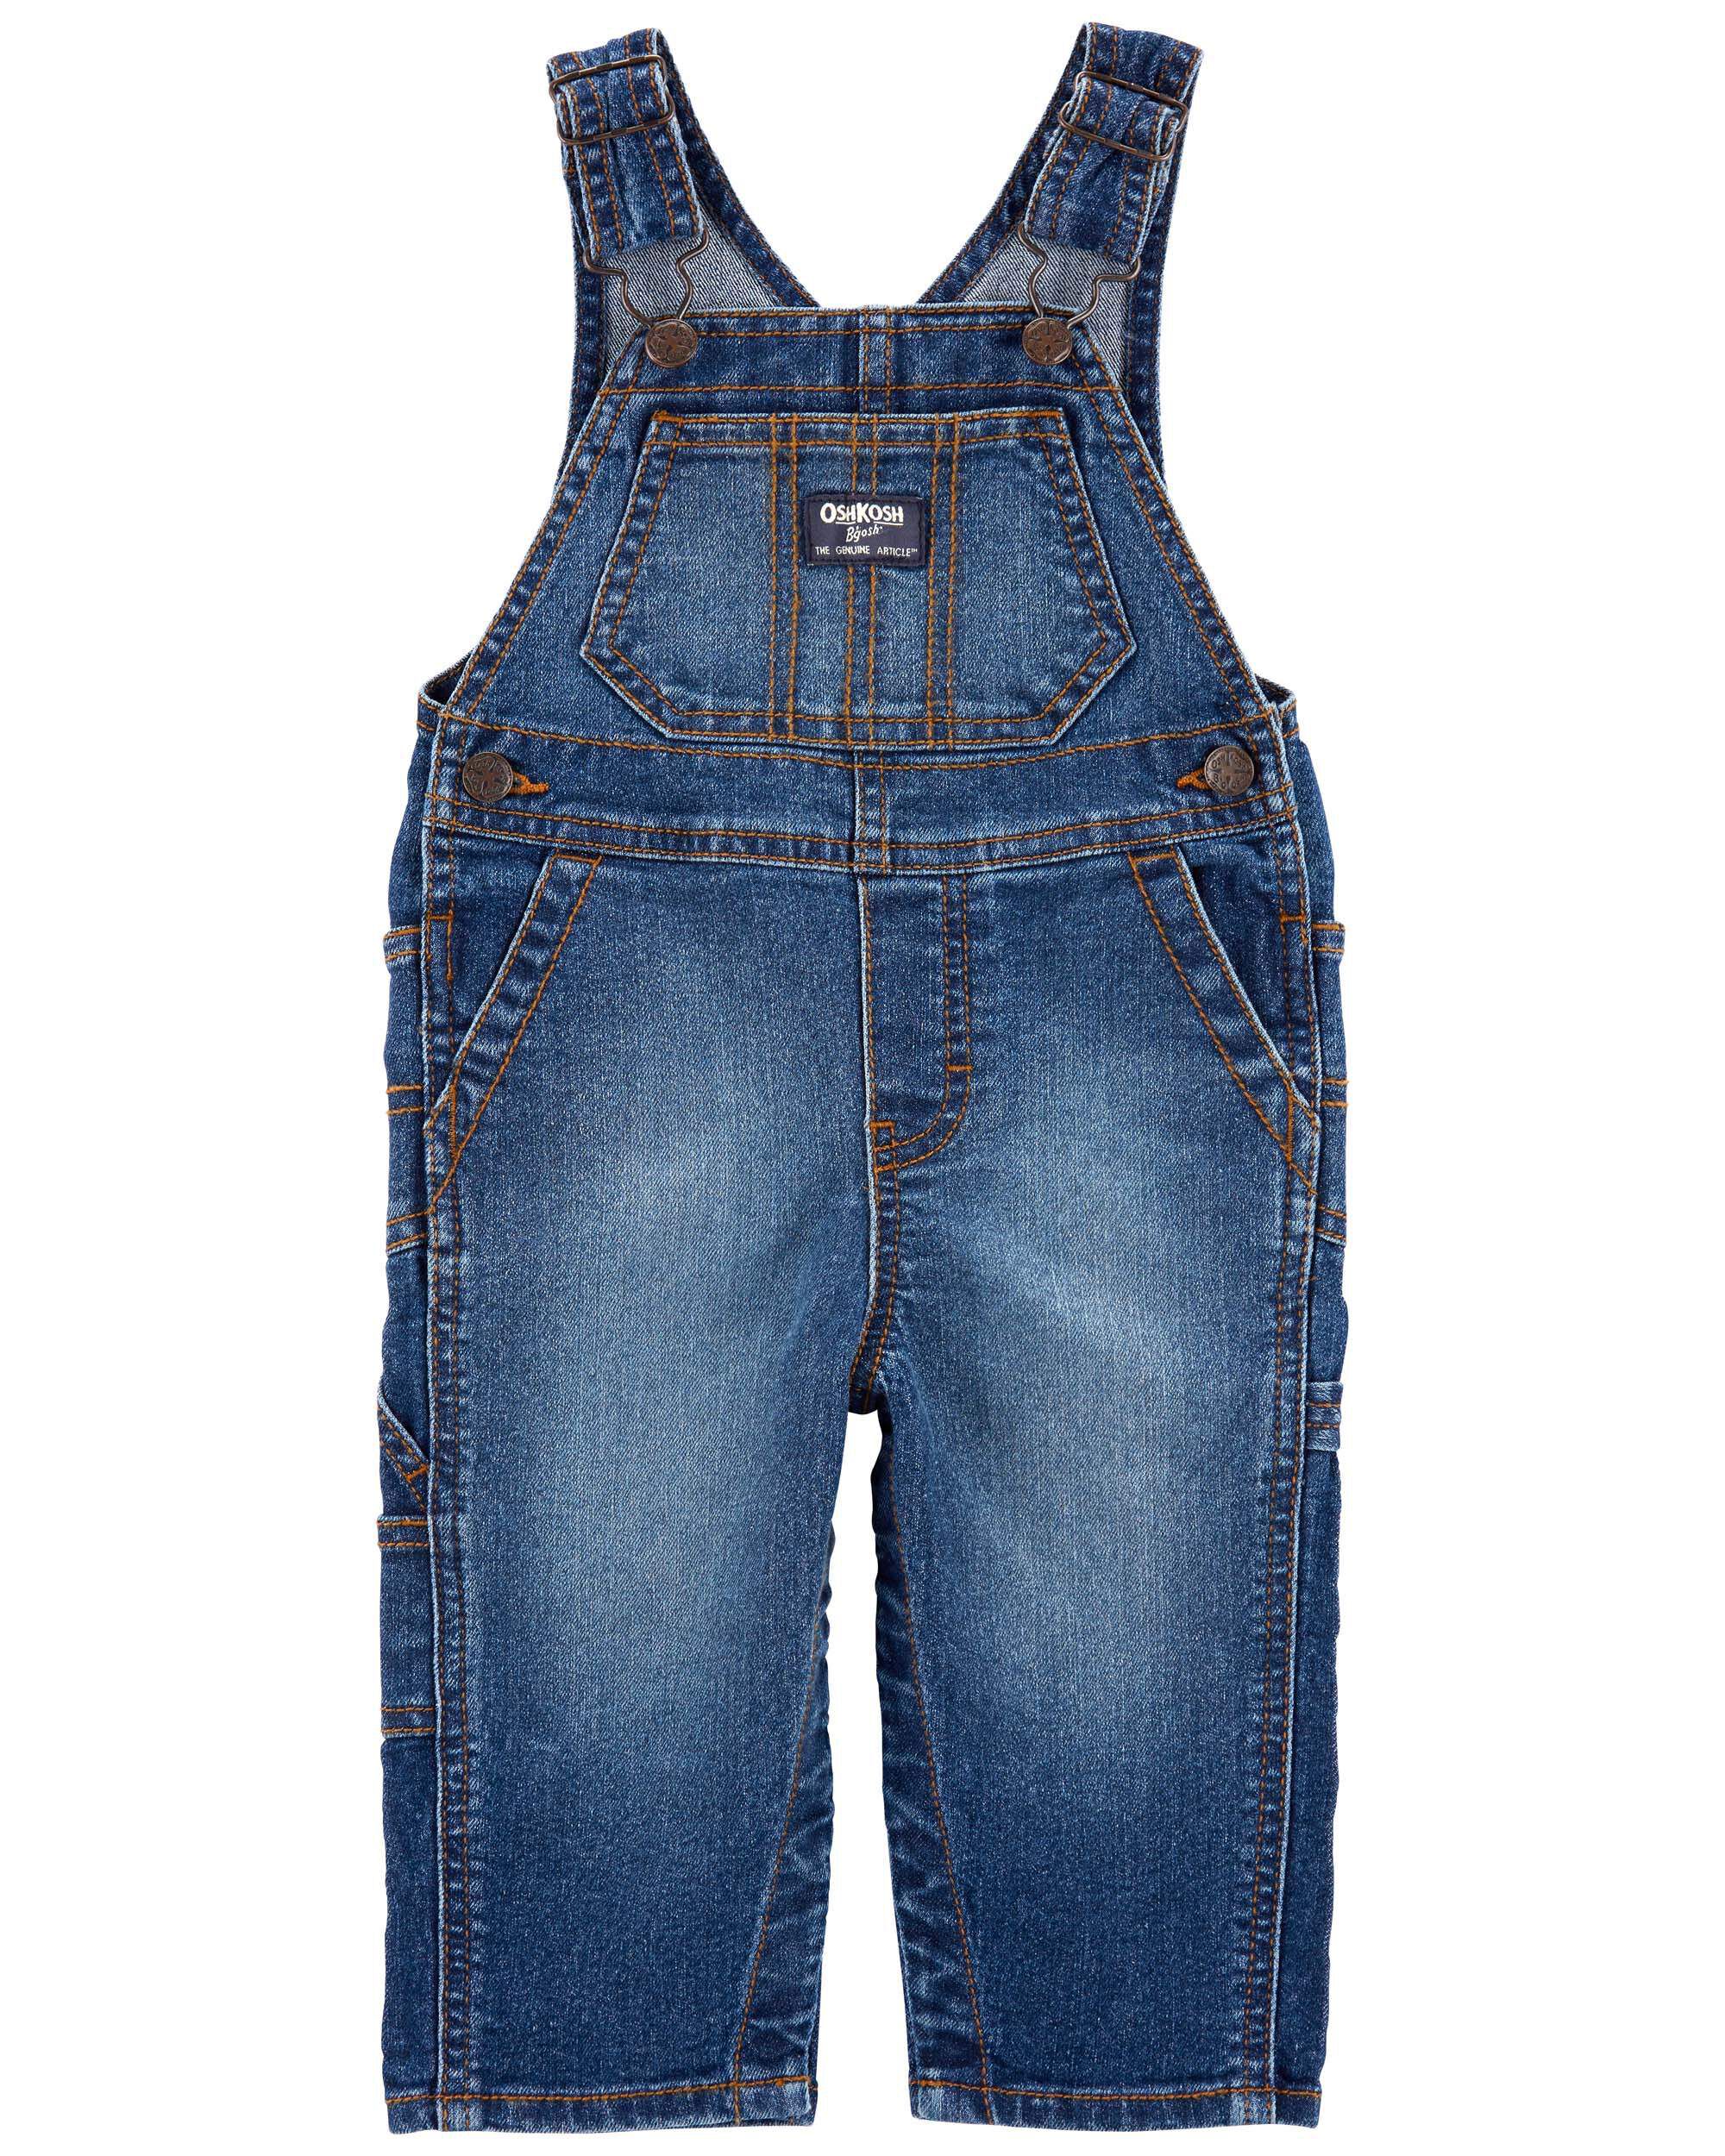 Denim Baby The Favourite Overalls: Hickory Stripe Remix | Carter's 